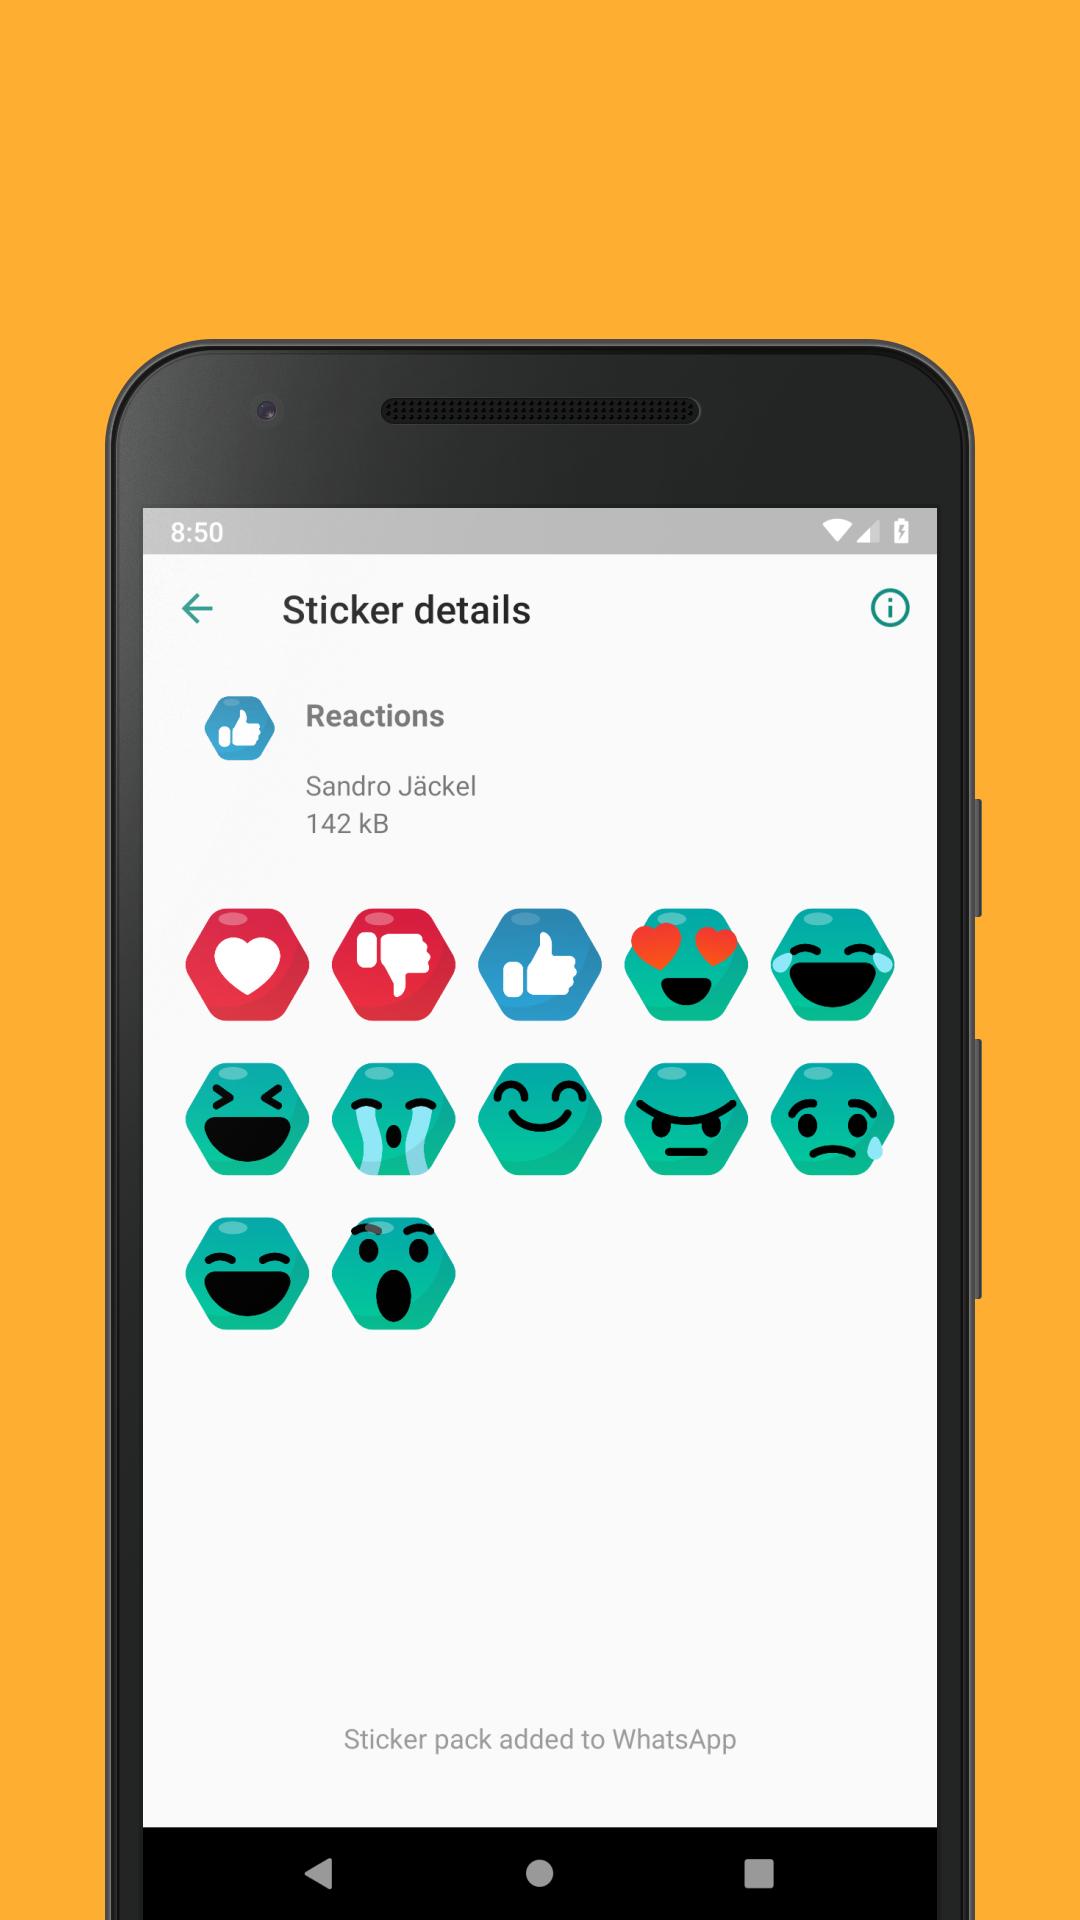 Emoticons Sticker Pack For Android Apk Download